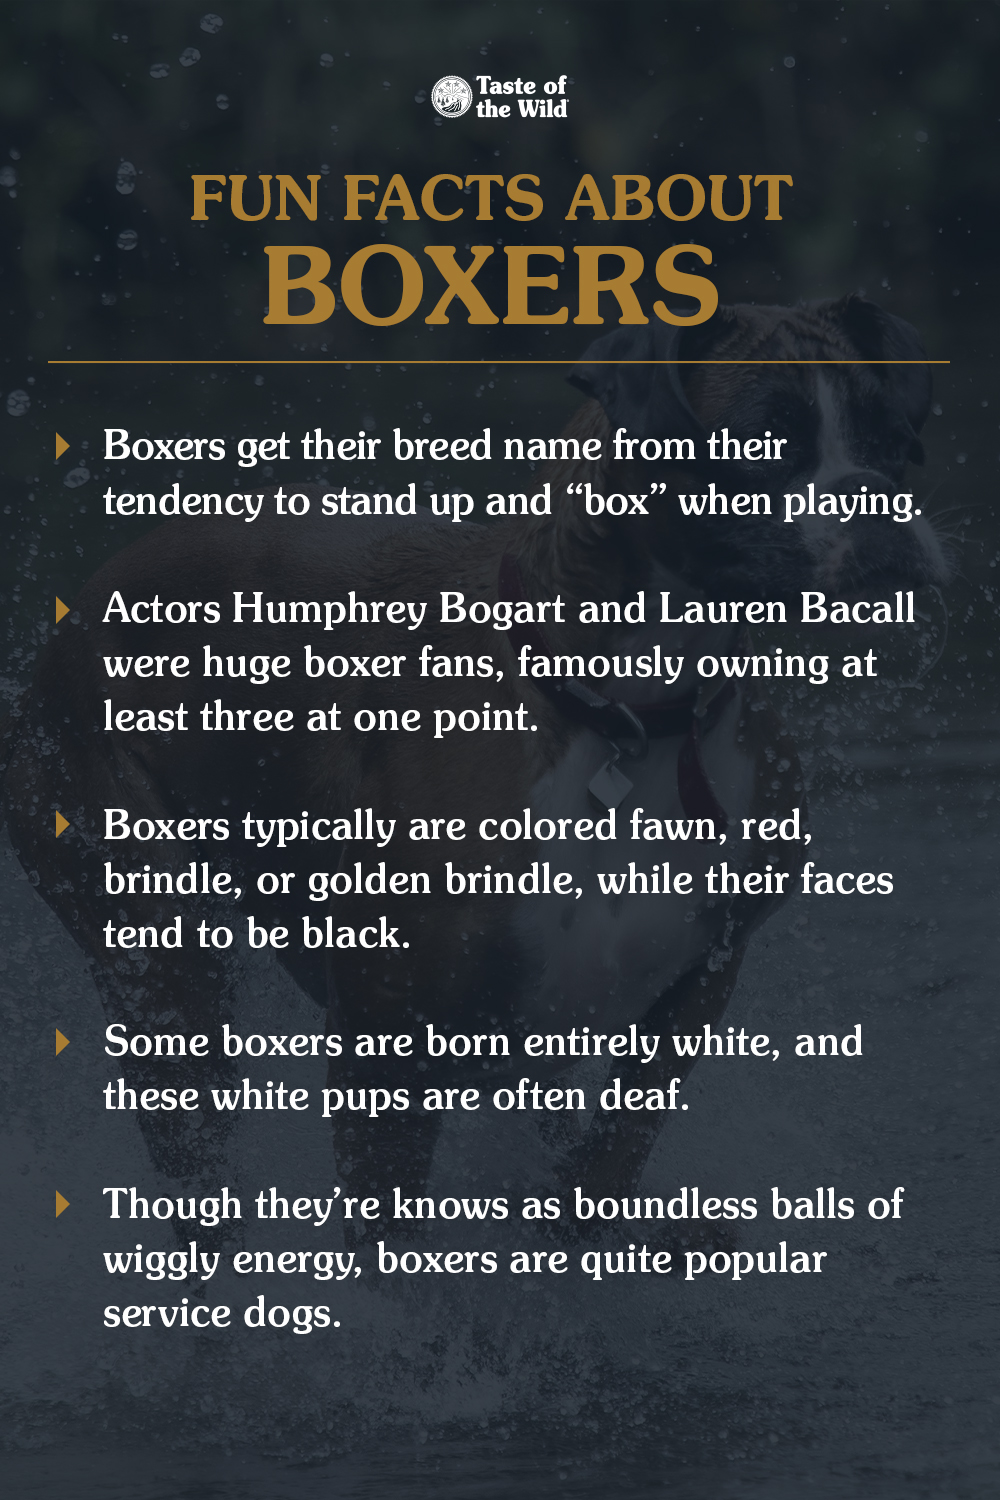 Fun Facts About Boxers Info Graphic | Taste of the Wild